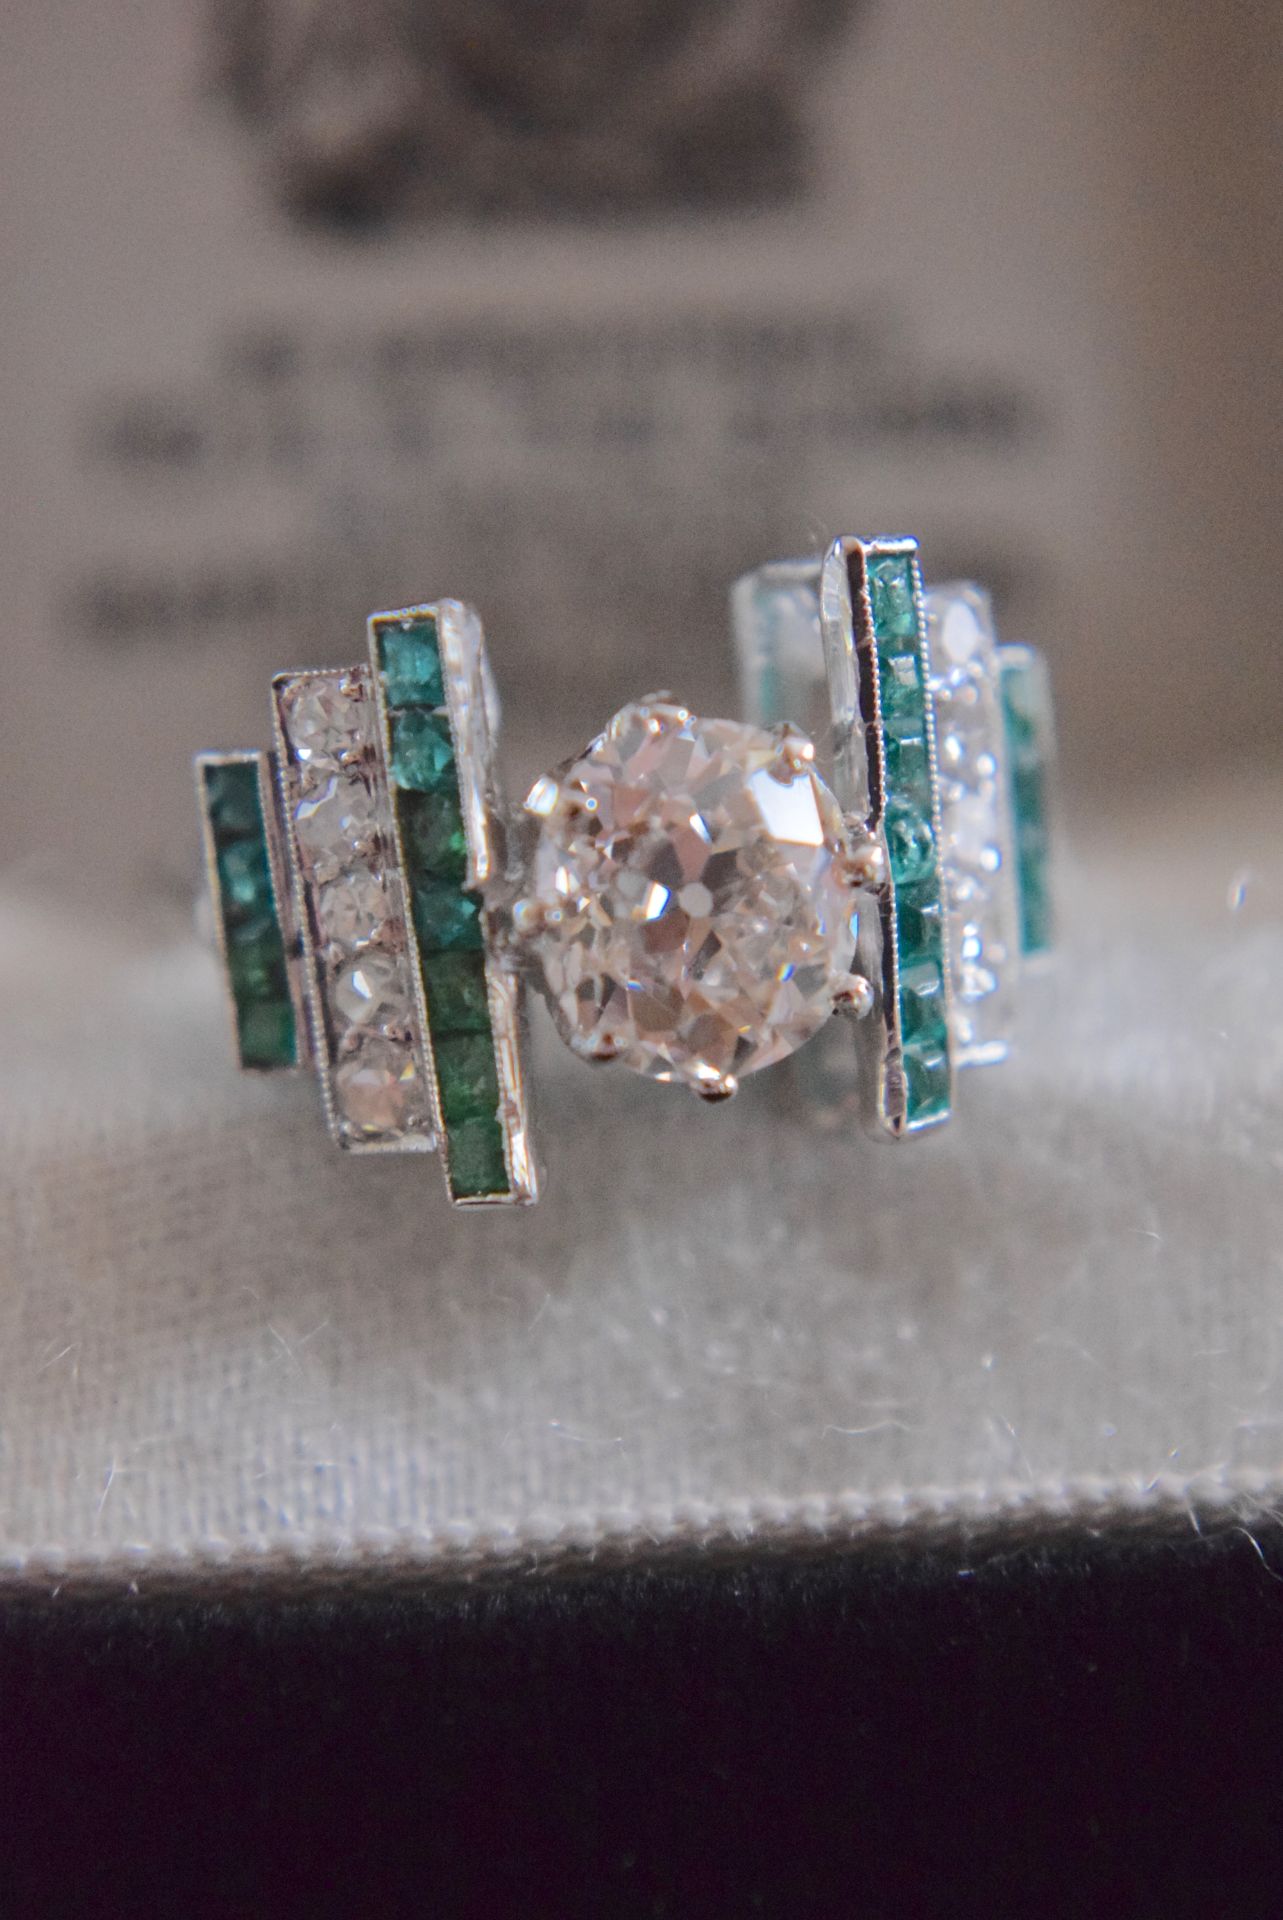 *PLATINUM OLD CUT 1.35CT DIAMOND AND EMERALD RING* - VS2 OLD CUT CENTRE PIECE DIAMOND (TCW = 2.65CT) - Image 2 of 7